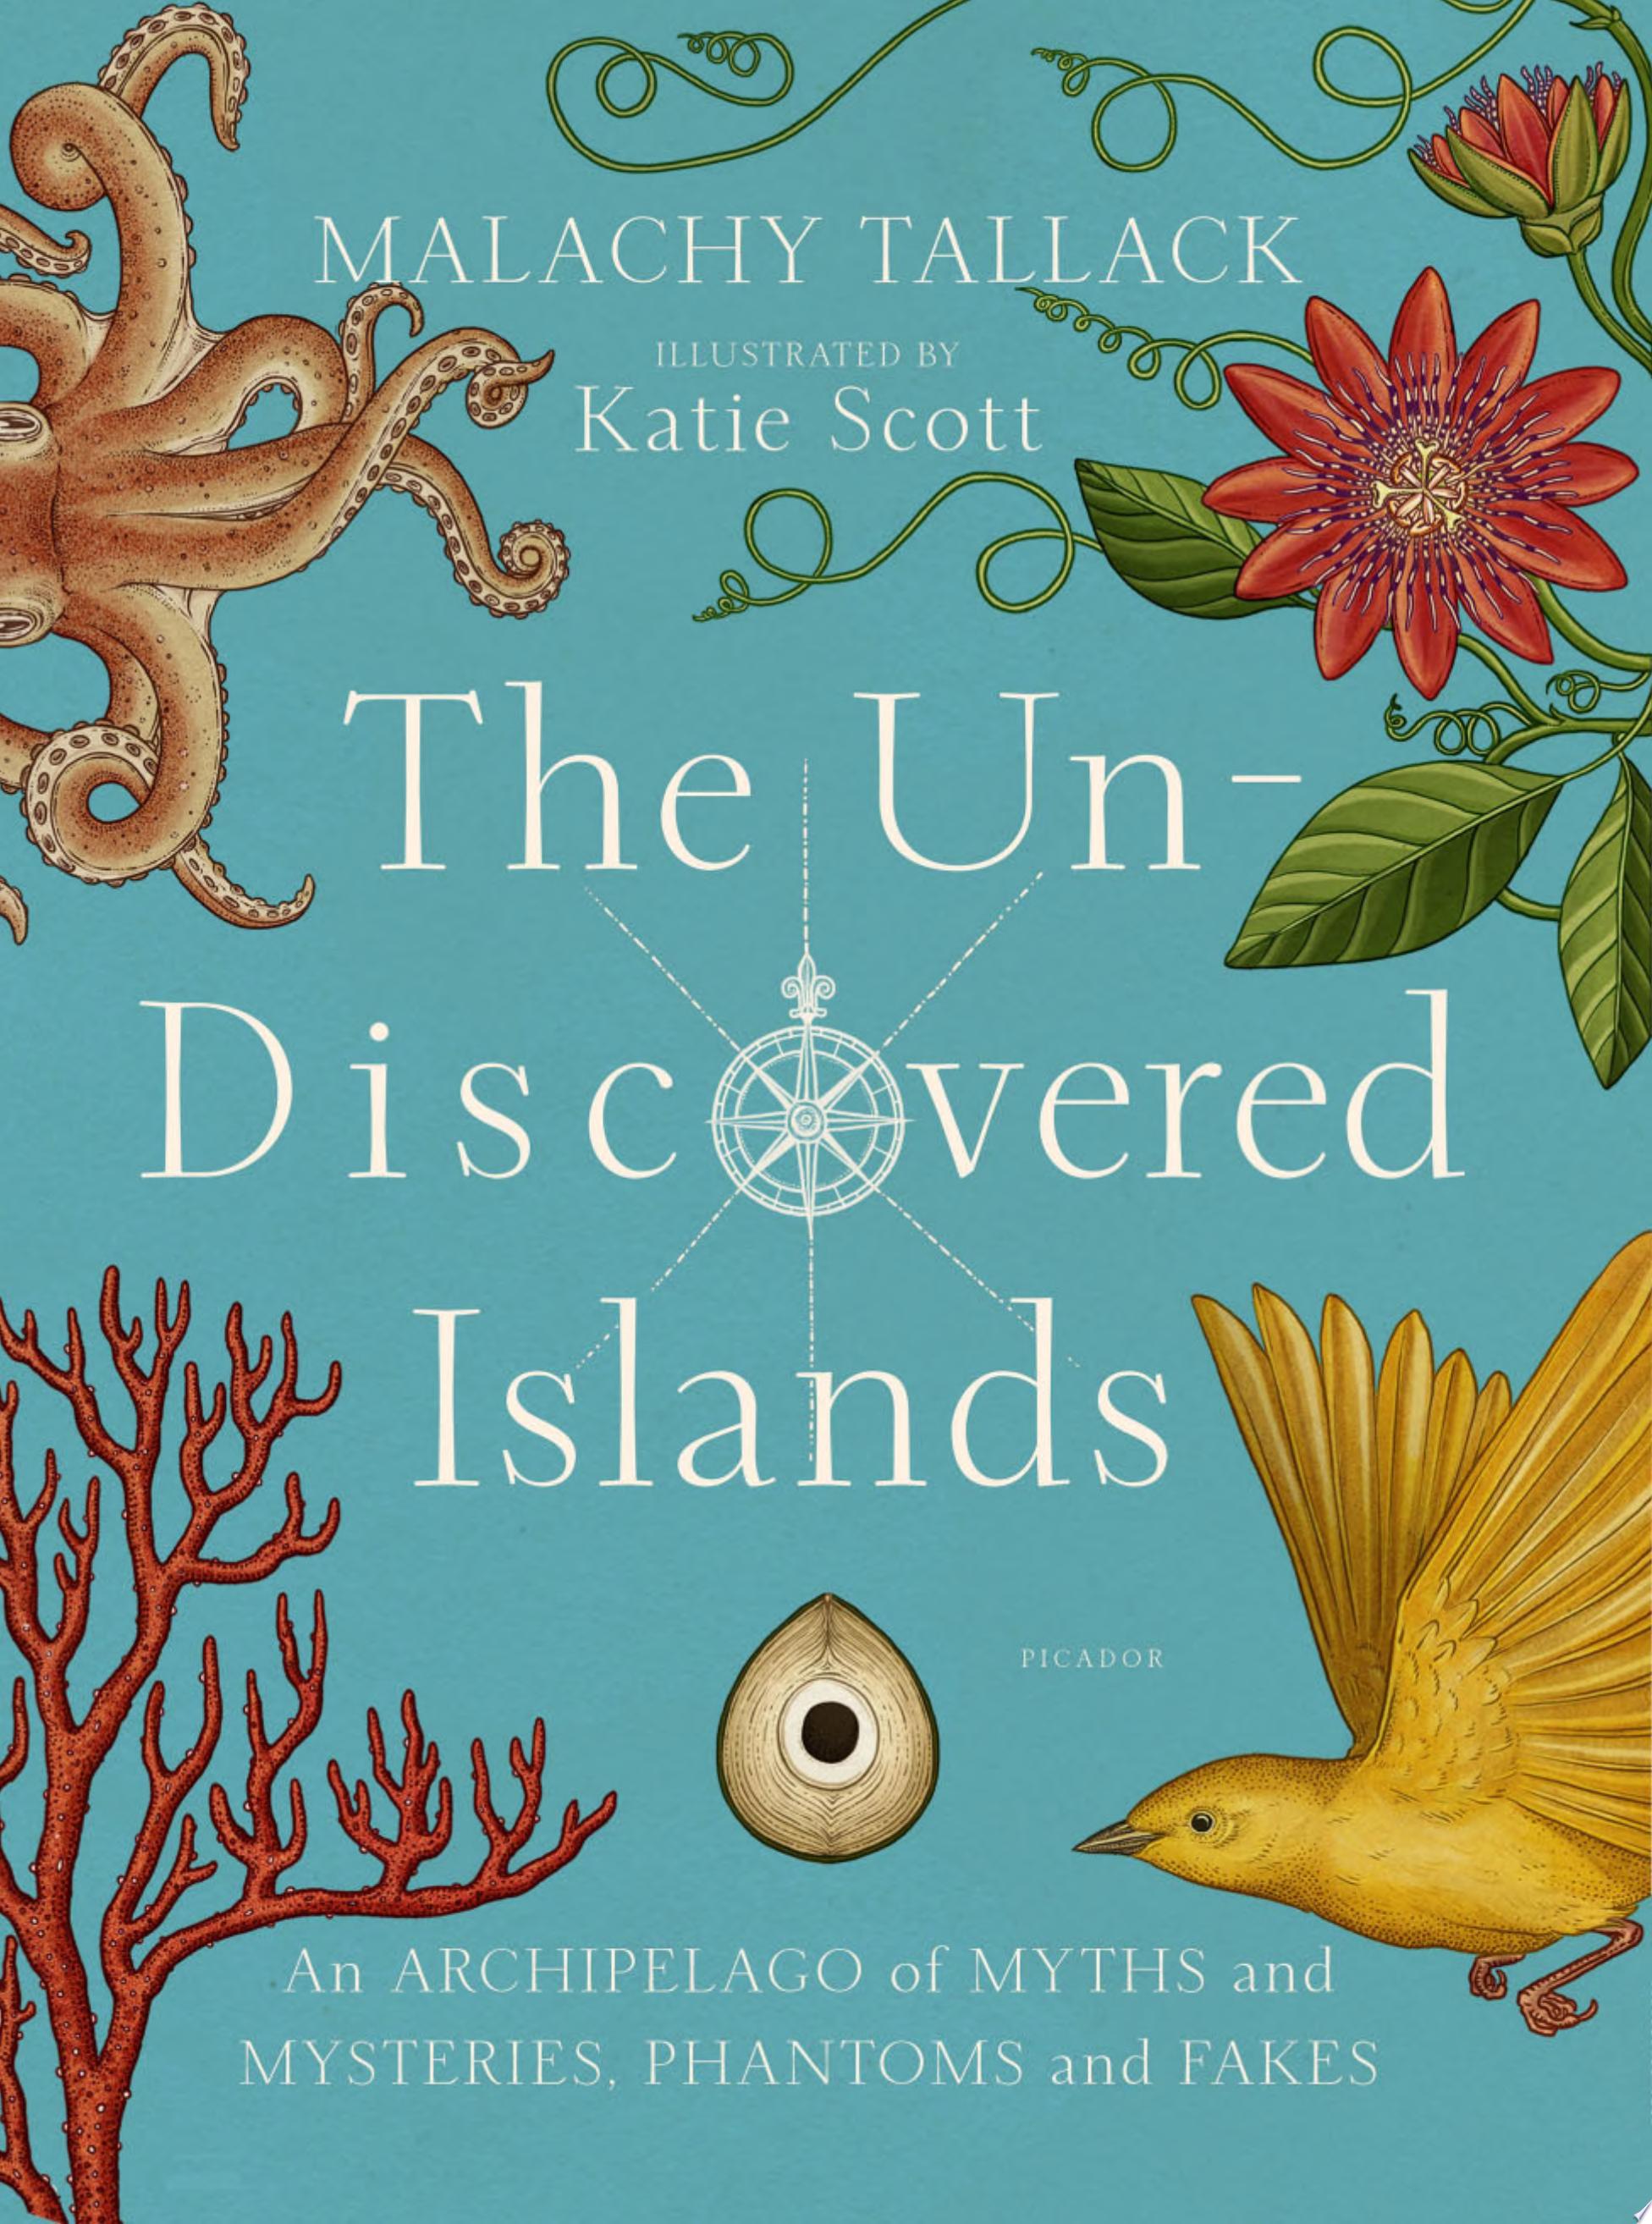 Image for "The Un-Discovered Islands"